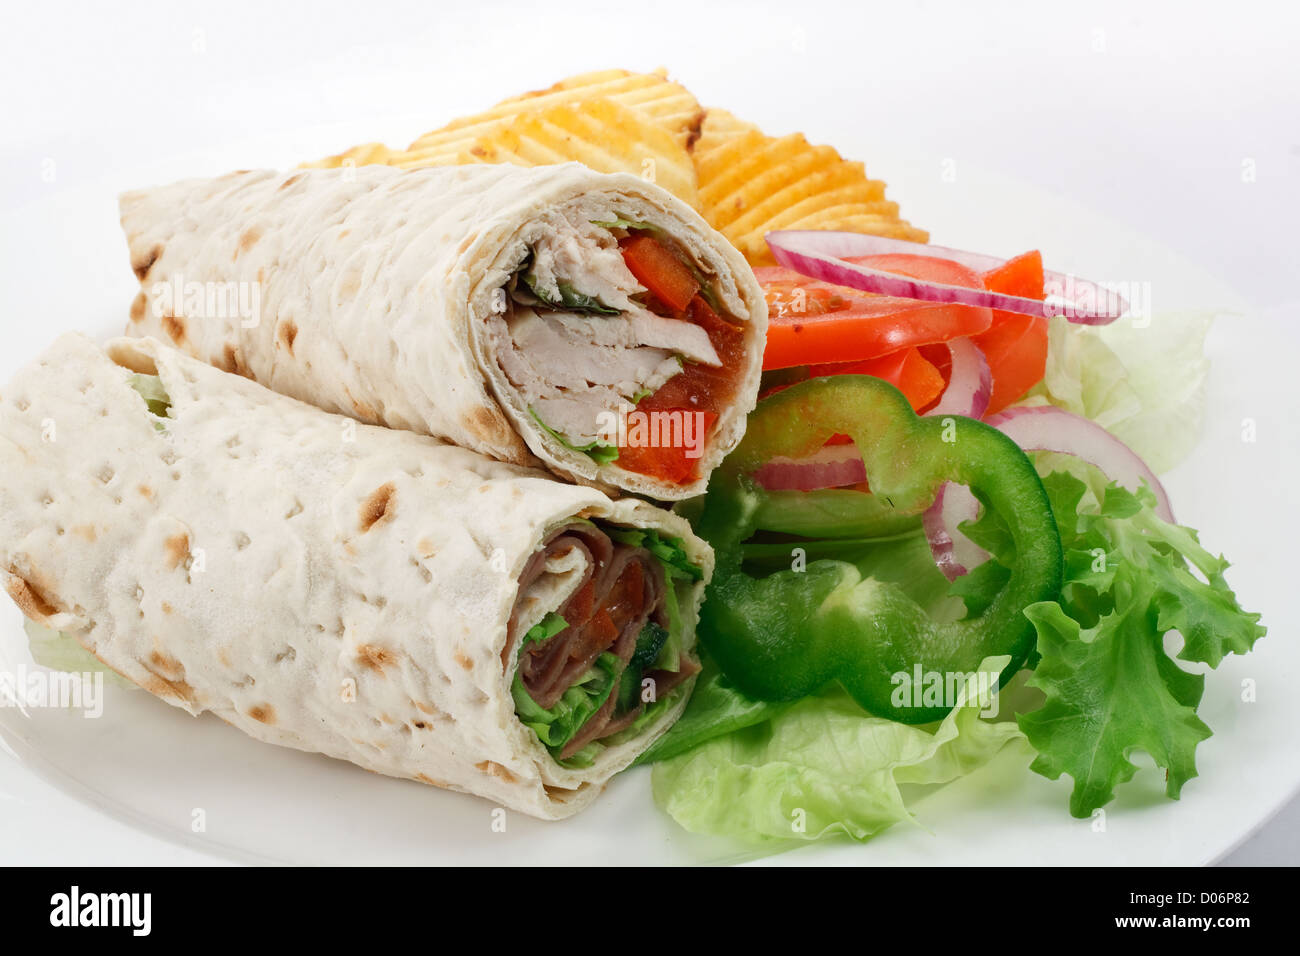 sliced tortilla wraps a rollup of flatbread with various fillings Stock Photo